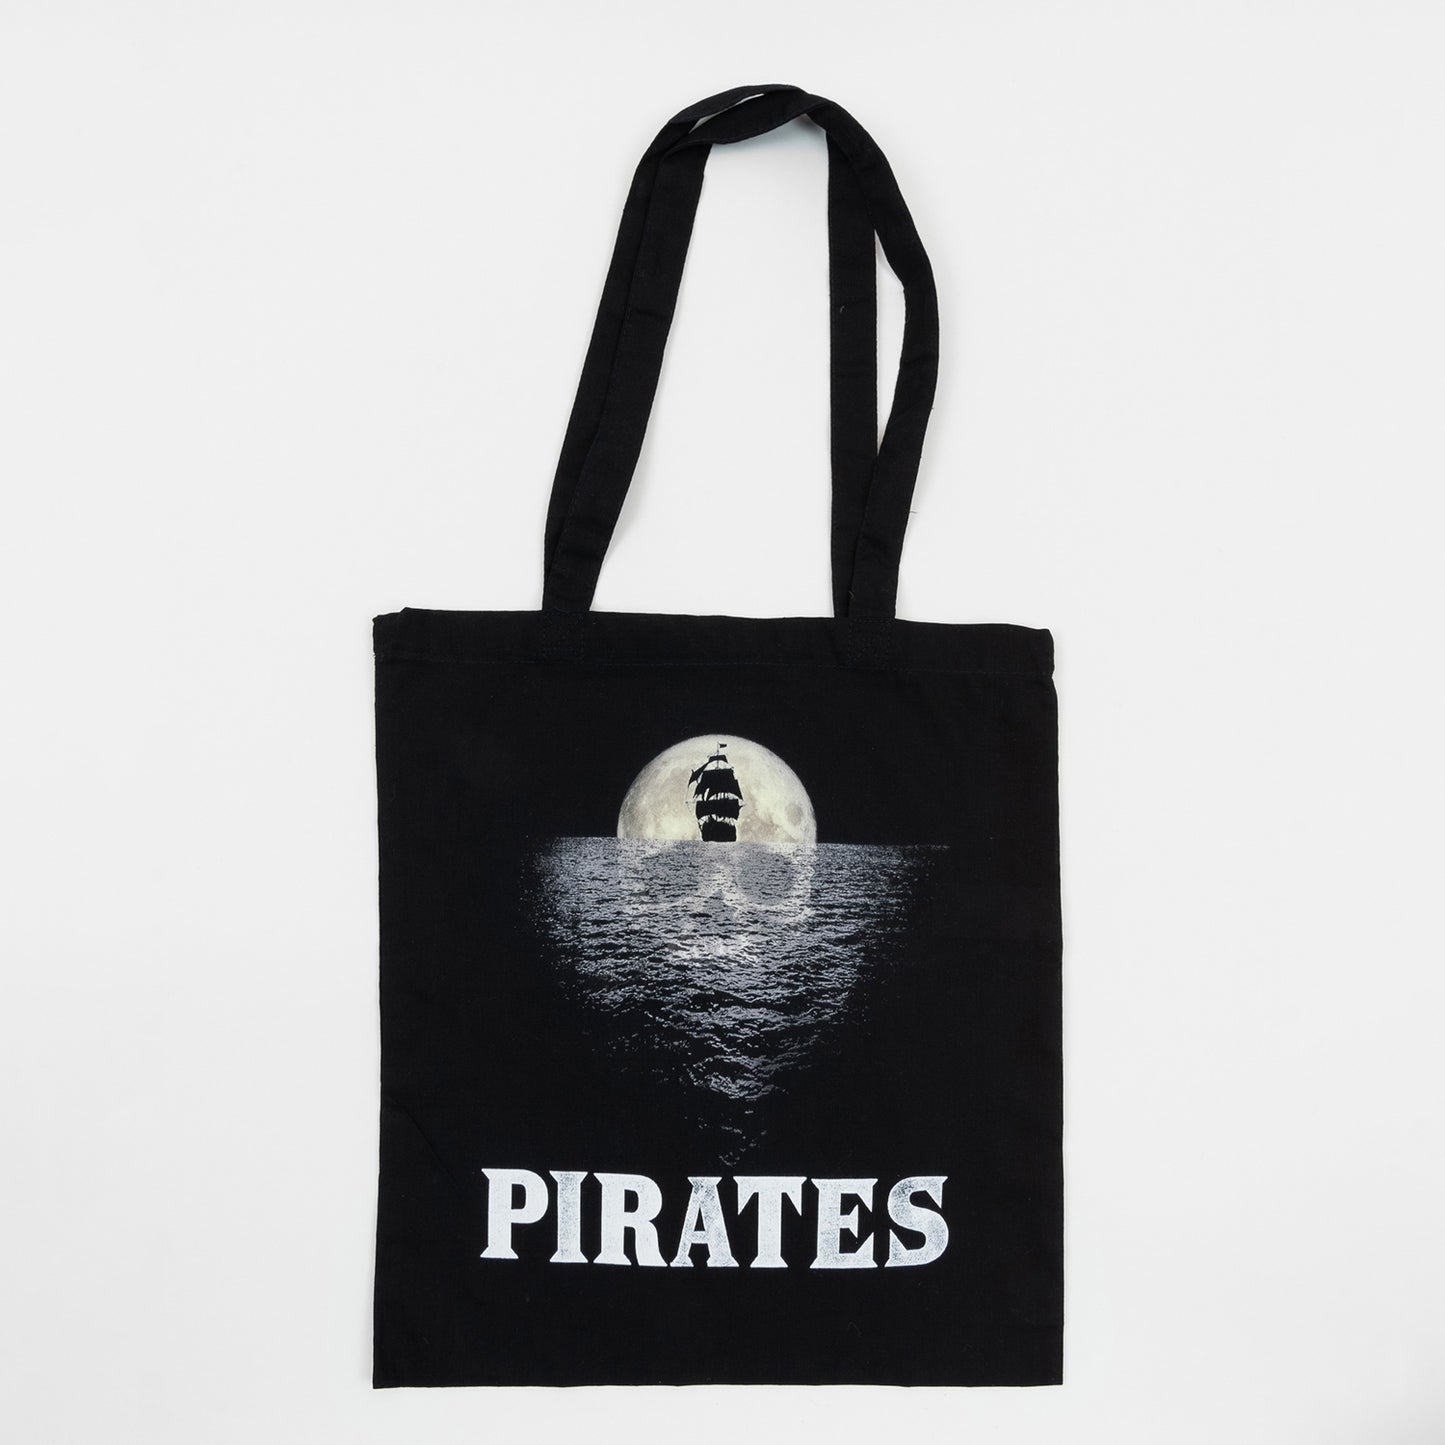 National Maritime Museum Cornwall Pirate Exhibition Tote Bag on a white background. The black tote bag features the exhibition graphic of a moon-shaped skull reflecting on the ocean behind the black shape of a ship.